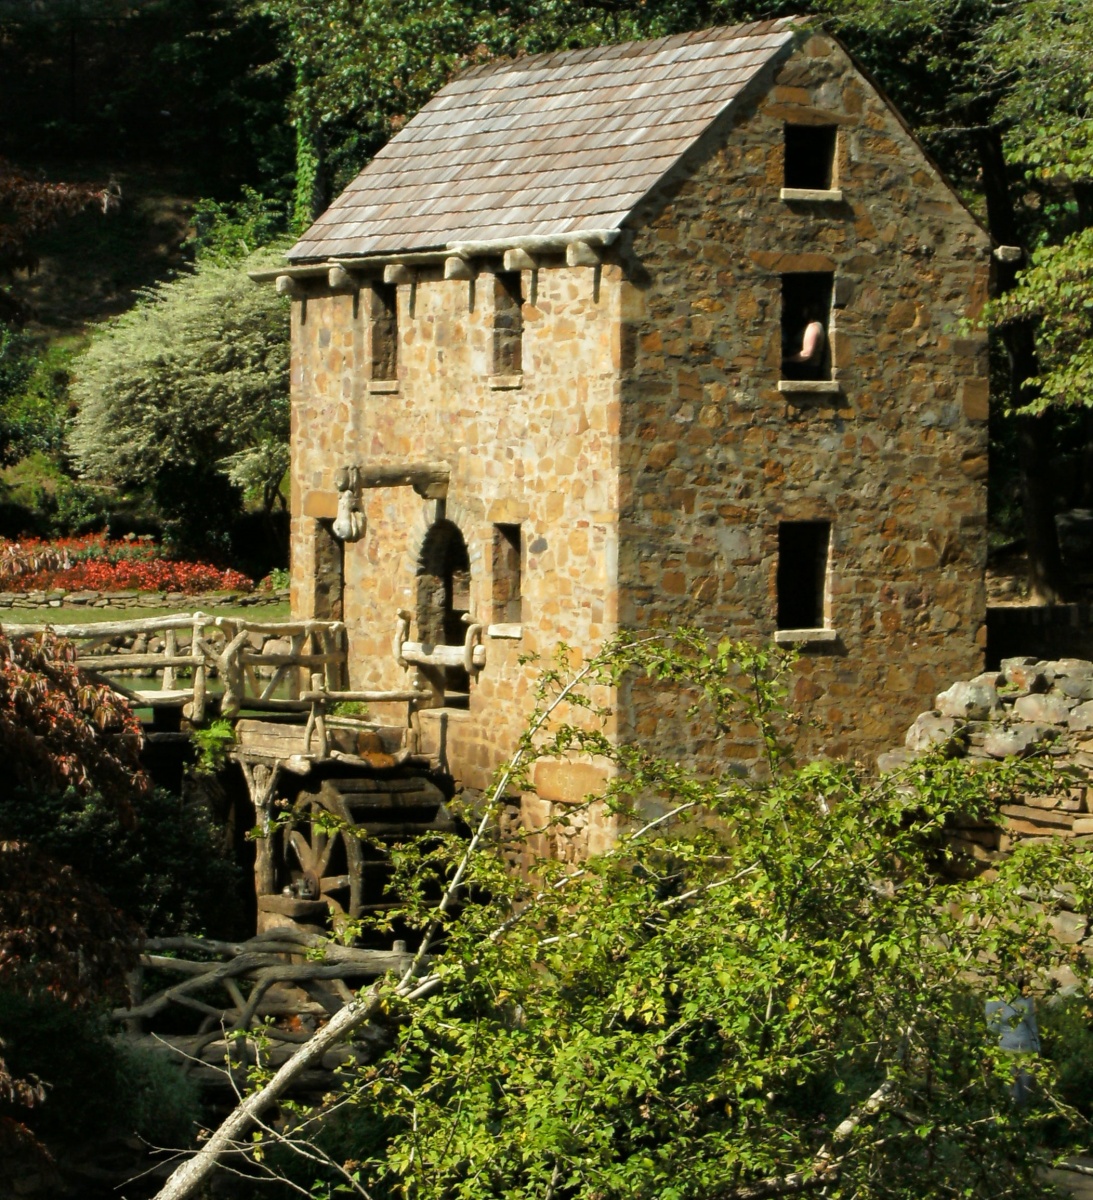 The Old Mill, North Little Rock AR.  Photo taken September 2012.